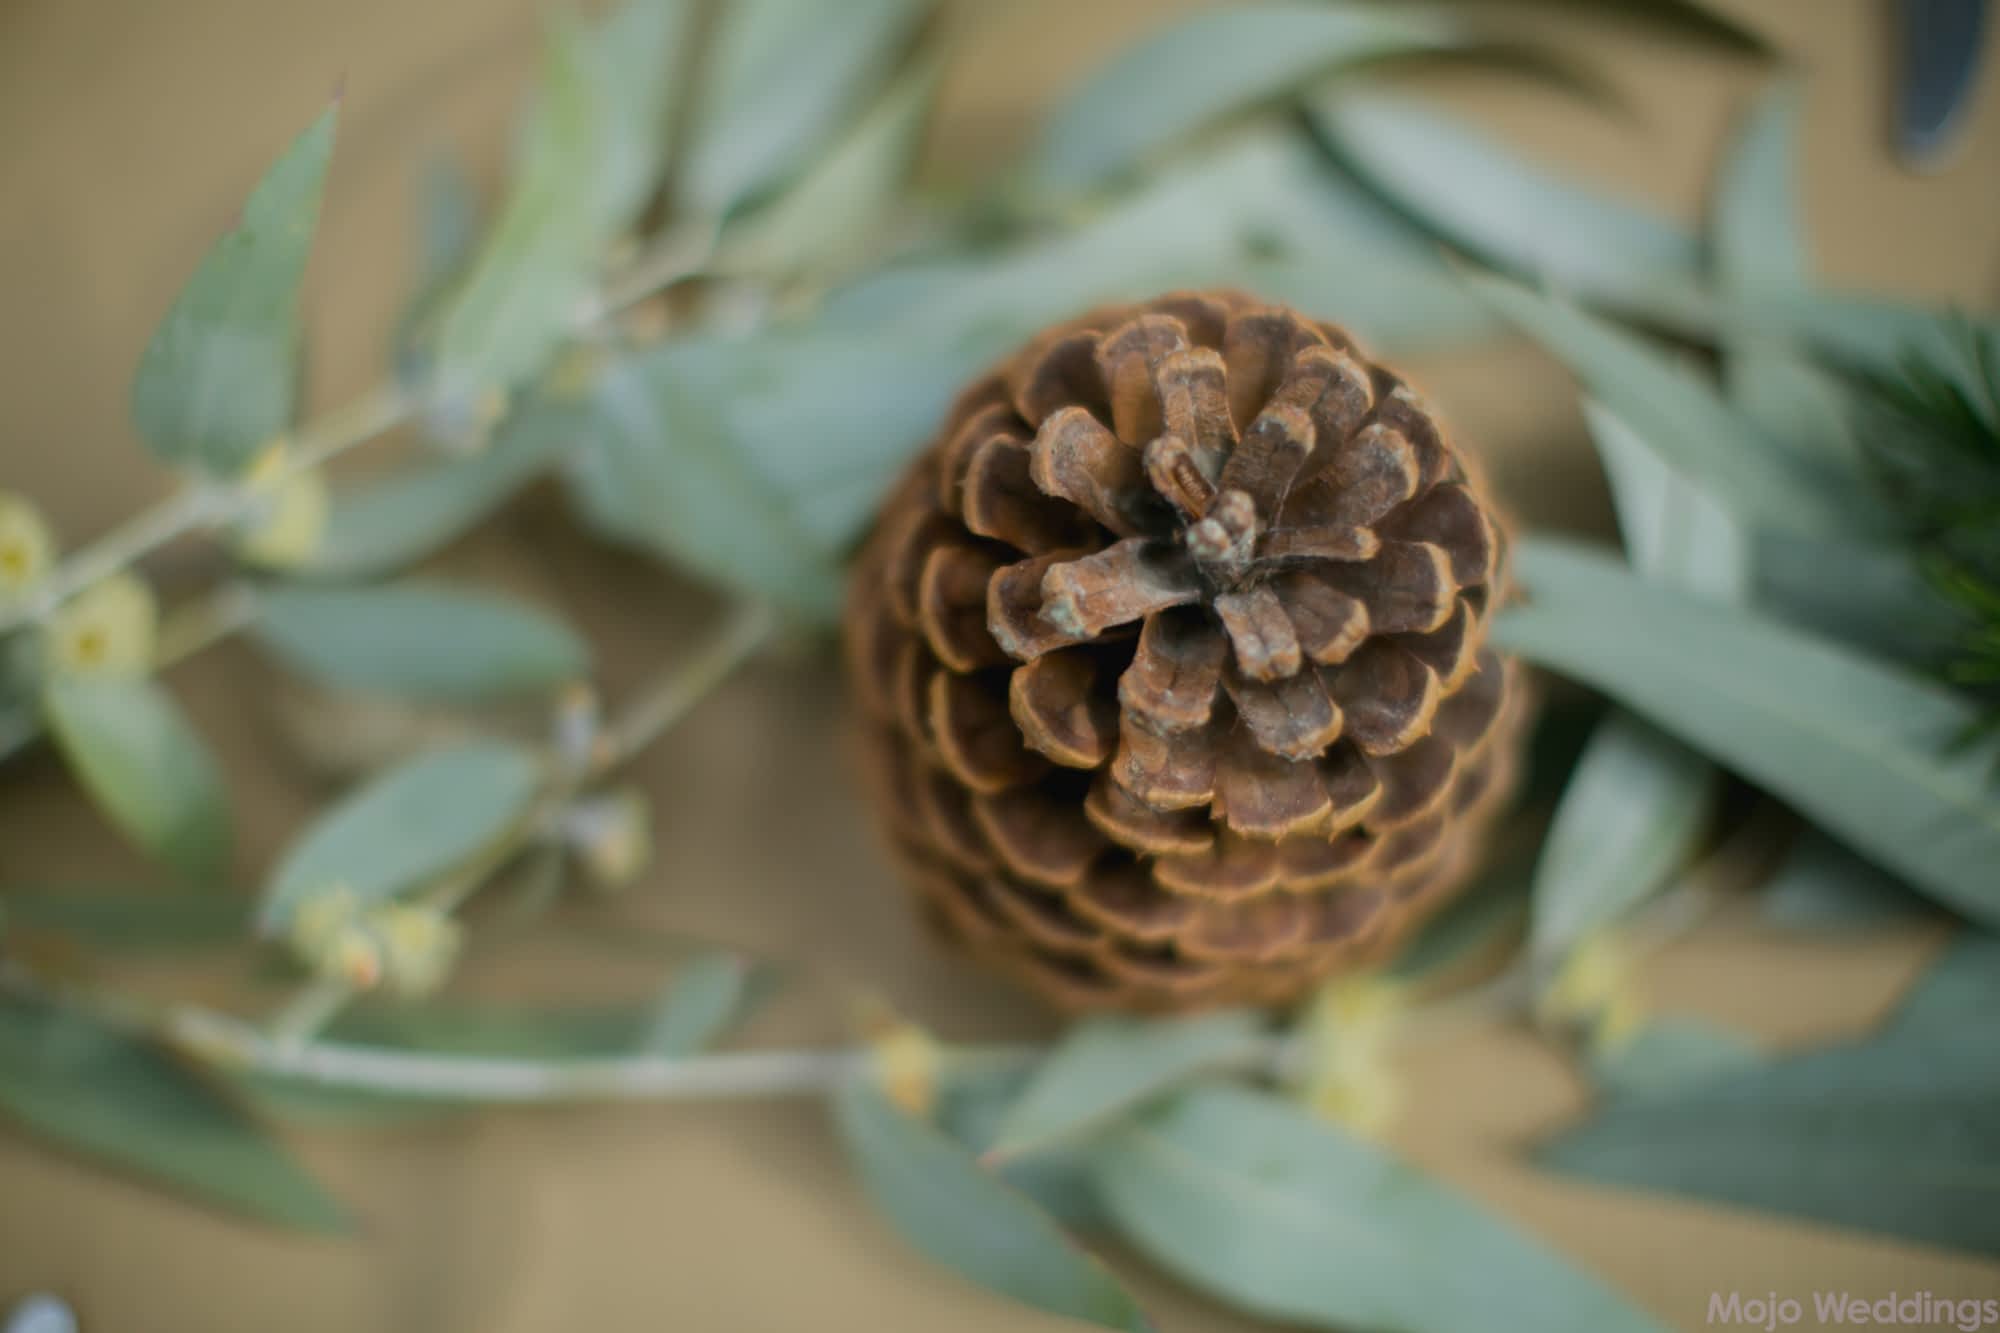 A pine cone sits among eucalyptus leaves as a centerpiece.